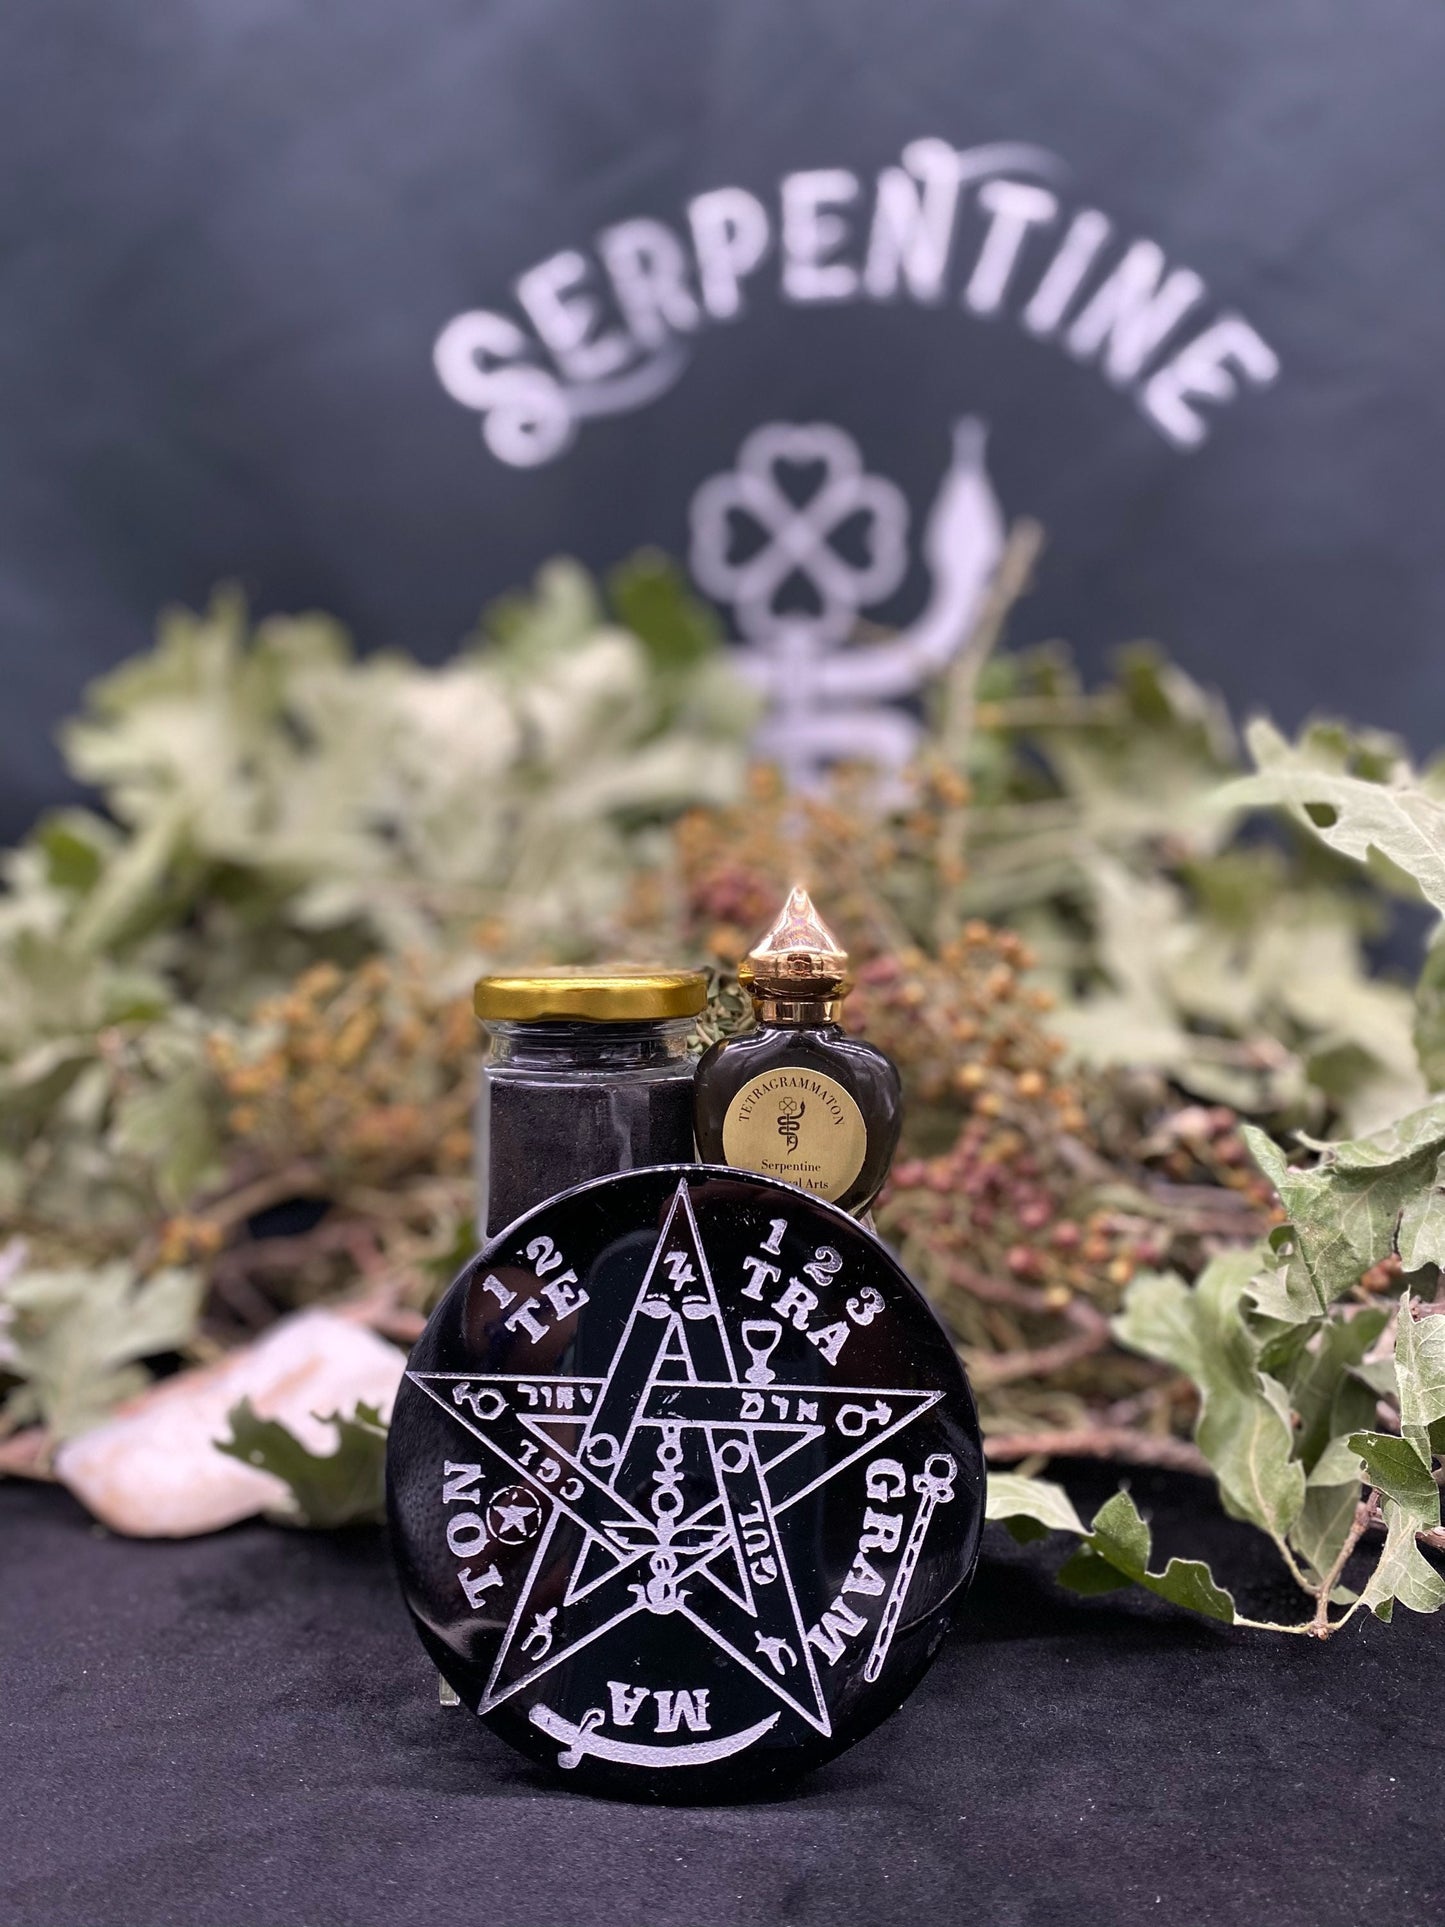 Tetragrammaton Incense (Aleister Crowley Recipe) + Our Favorite Incense + Ritually Charged + Ceremonial Magick + Sorcery + Necromancy